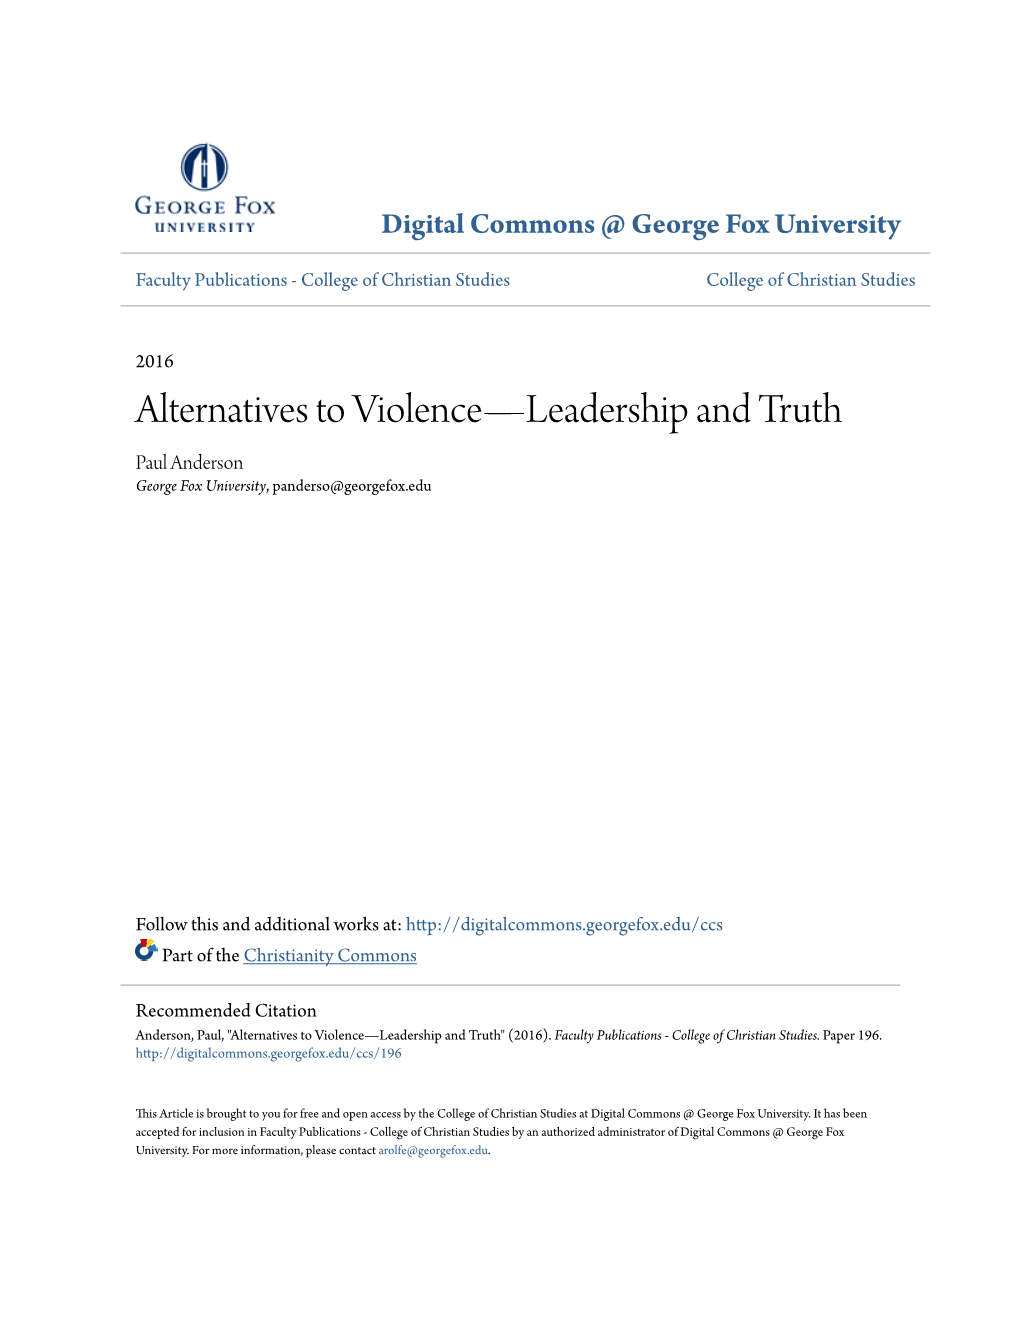 Alternatives to Violenceâ•Flleadership and Truth